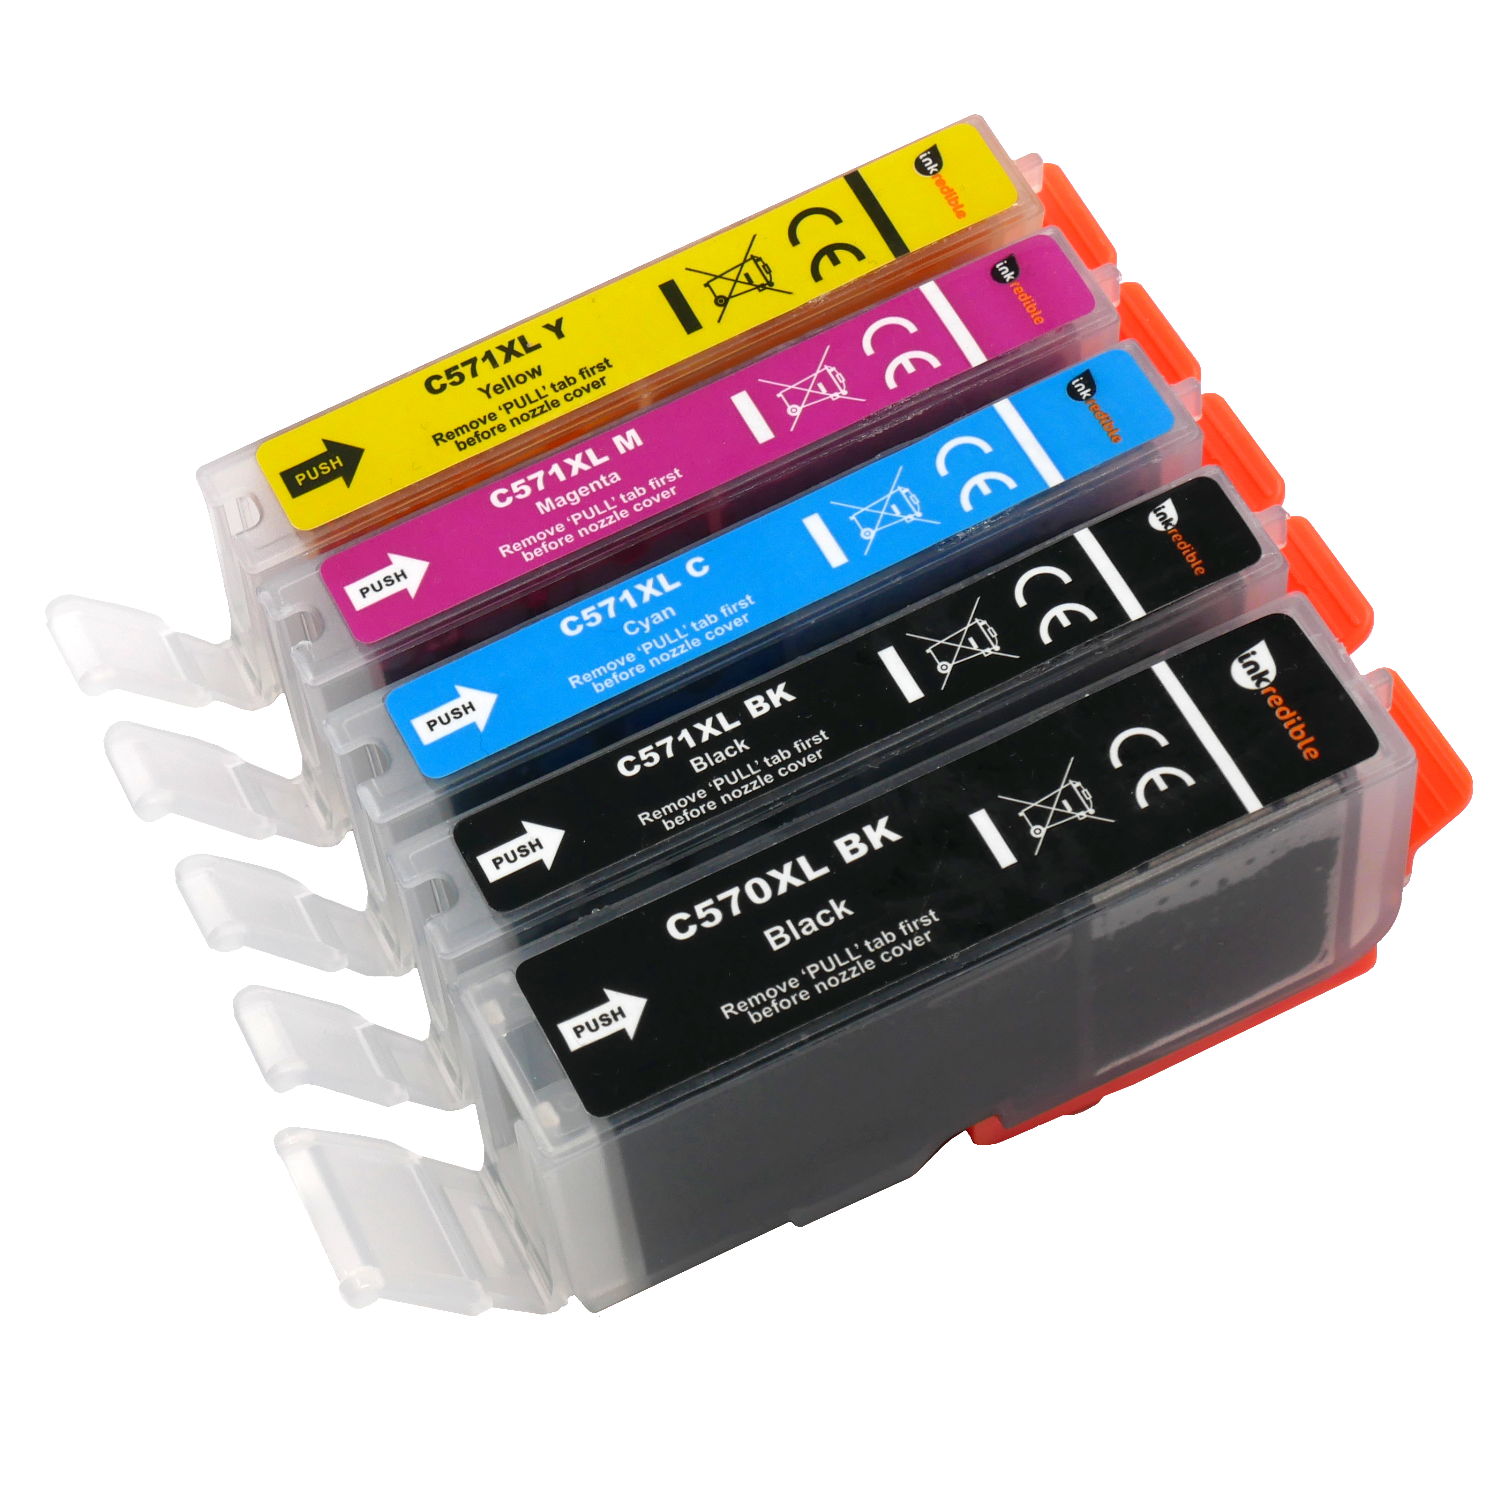 https://www.inkredible.co.uk/images/thumbs/009/0091578_compatible-canon-pixma-mg6850-multipack-5-pack-ink-cartridges-68bda72c-39a1-4dc9-aadd-134af8112e5a.png